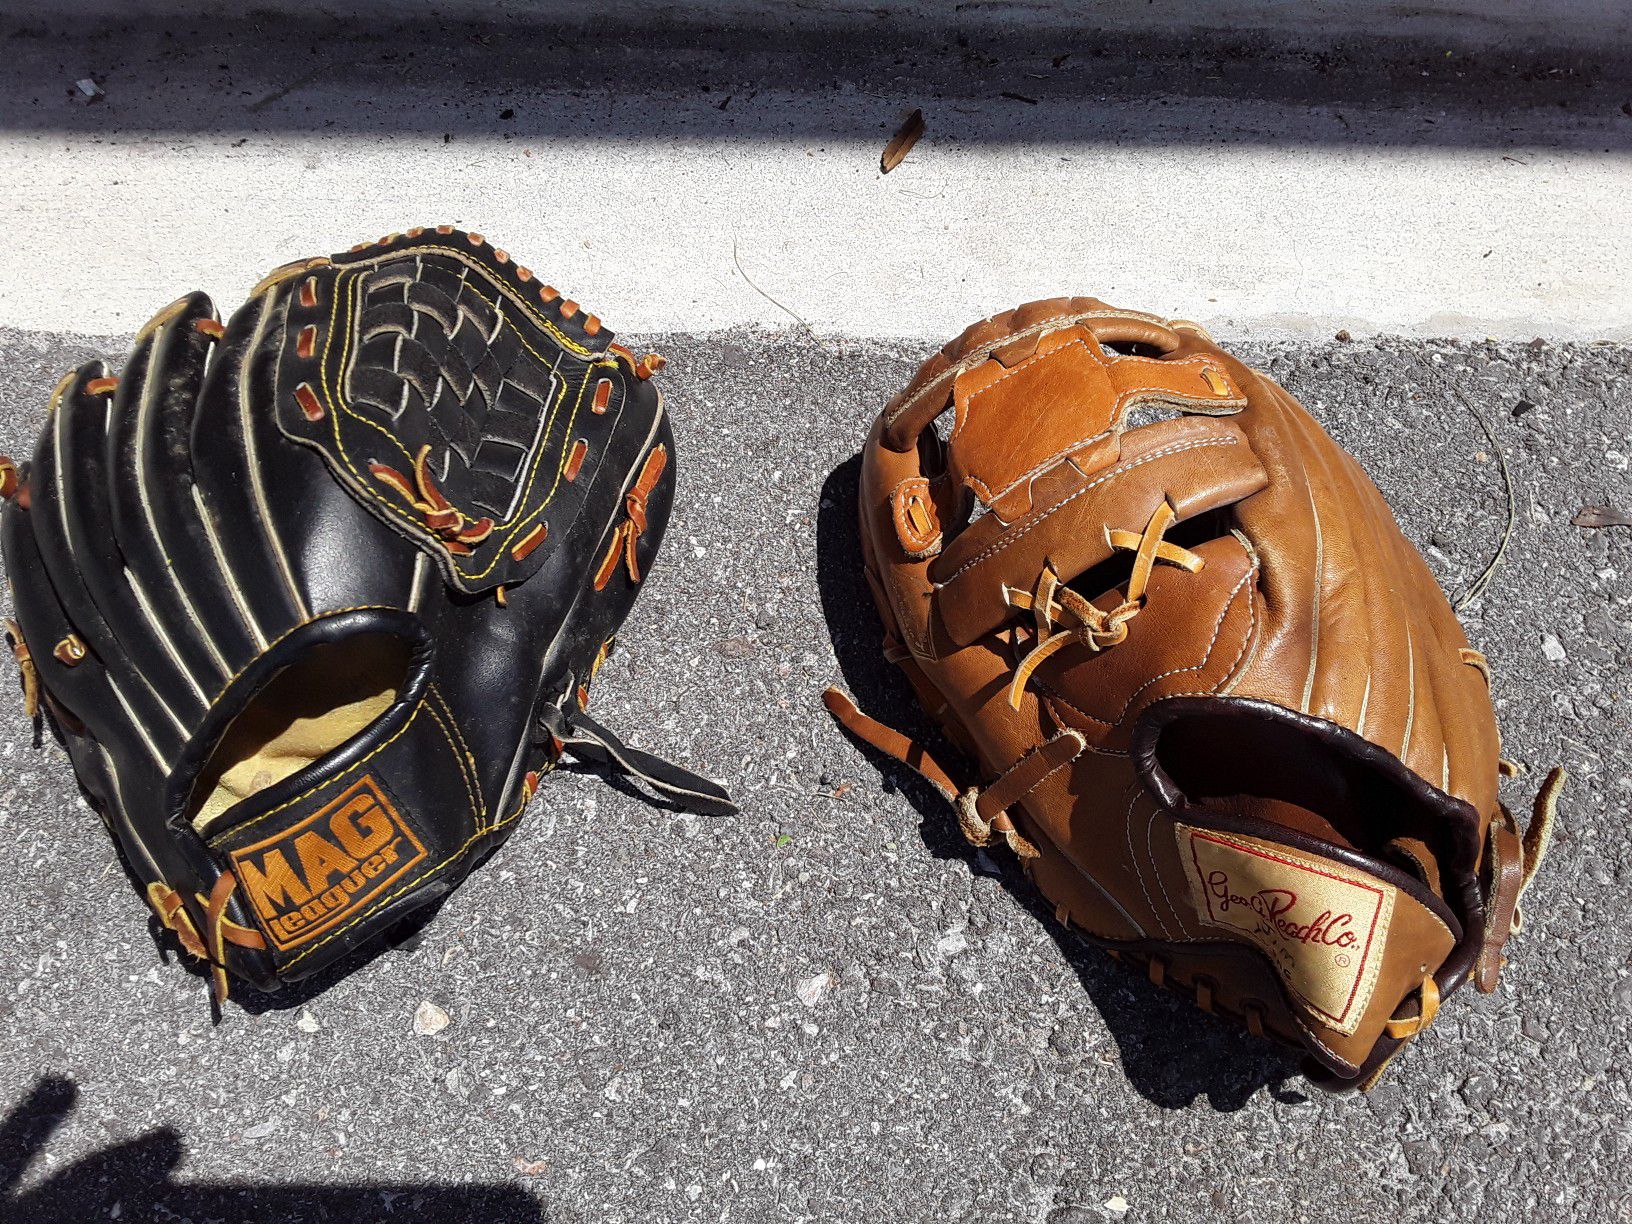 All leather baseball gloves one left one right